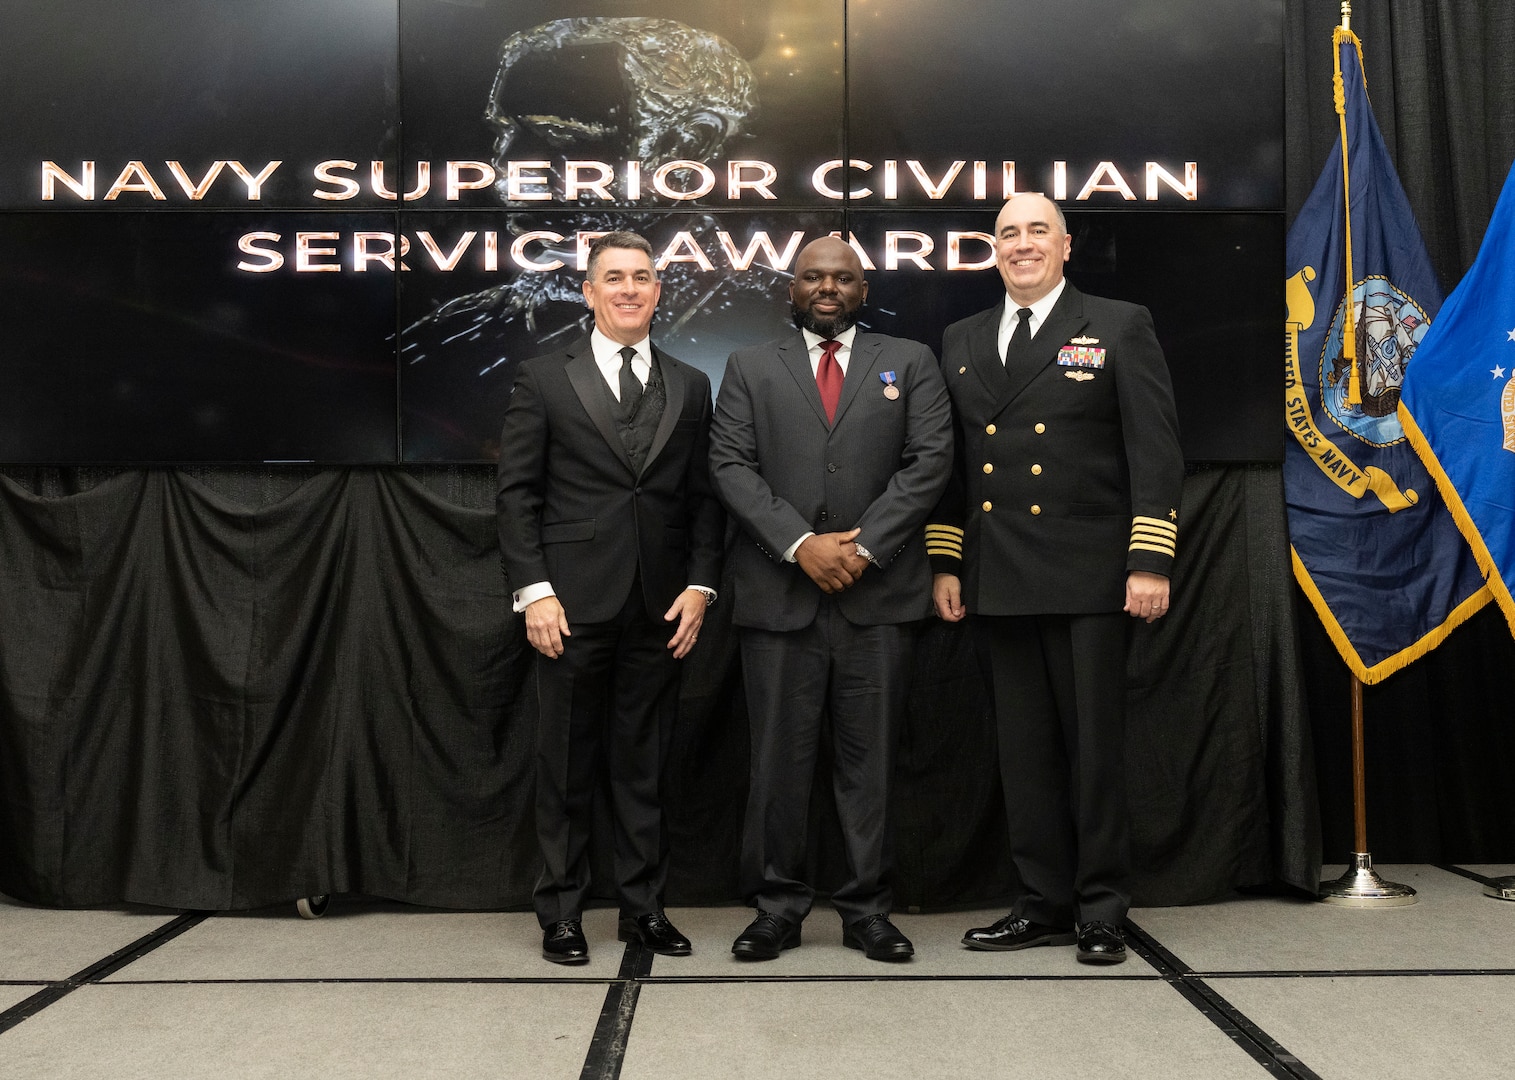 IMAGE: Naval Surface Warfare Center Dahlgren Division (NSWCDD) Technical Director Dale Sisson Jr., SES, and Commanding Officer Capt. Philip Mlynarski presented Willie Crank with the Navy Meritorious Civilian Service Award during the NSWCDD Annual Honorary Awards ceremony at the Fredericksburg Expo & Conference Center March 10.